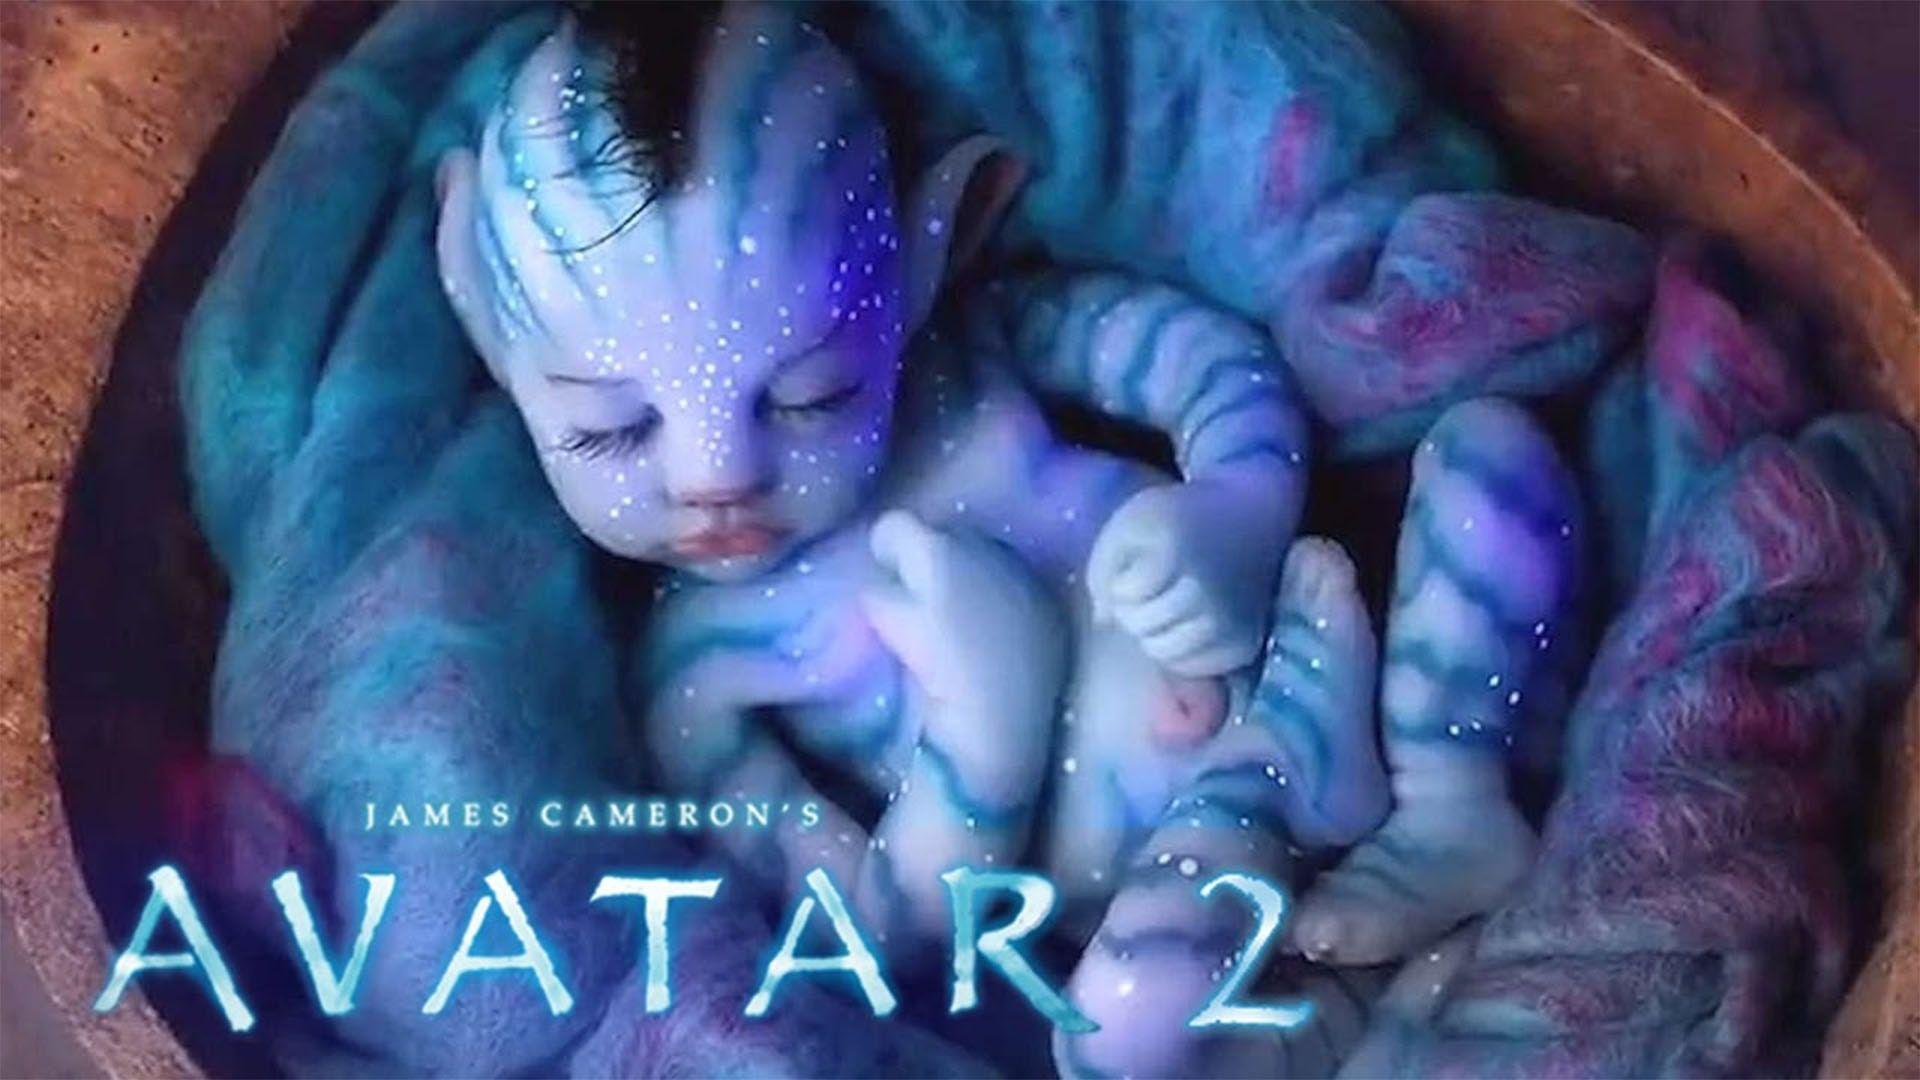 Avatar 2 Full Movie in hindi  Avatar 2 The Way Of Water full Movie 4k HD  Latest Hollywood movie HD from avatar movie download in hindi filmywap  Watch Video  HiFiMovco